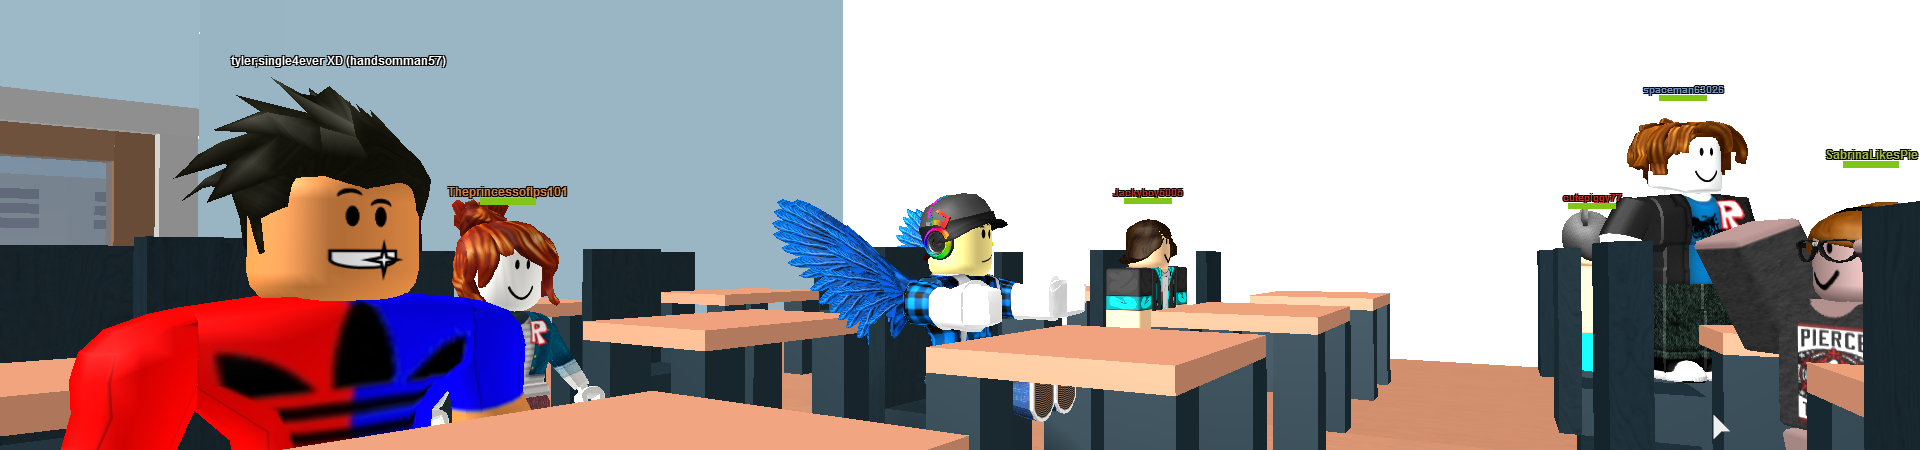 Going From Roblox Developer To Roblox Teacher Roblox Blog - do you use roblox for school roblox blog